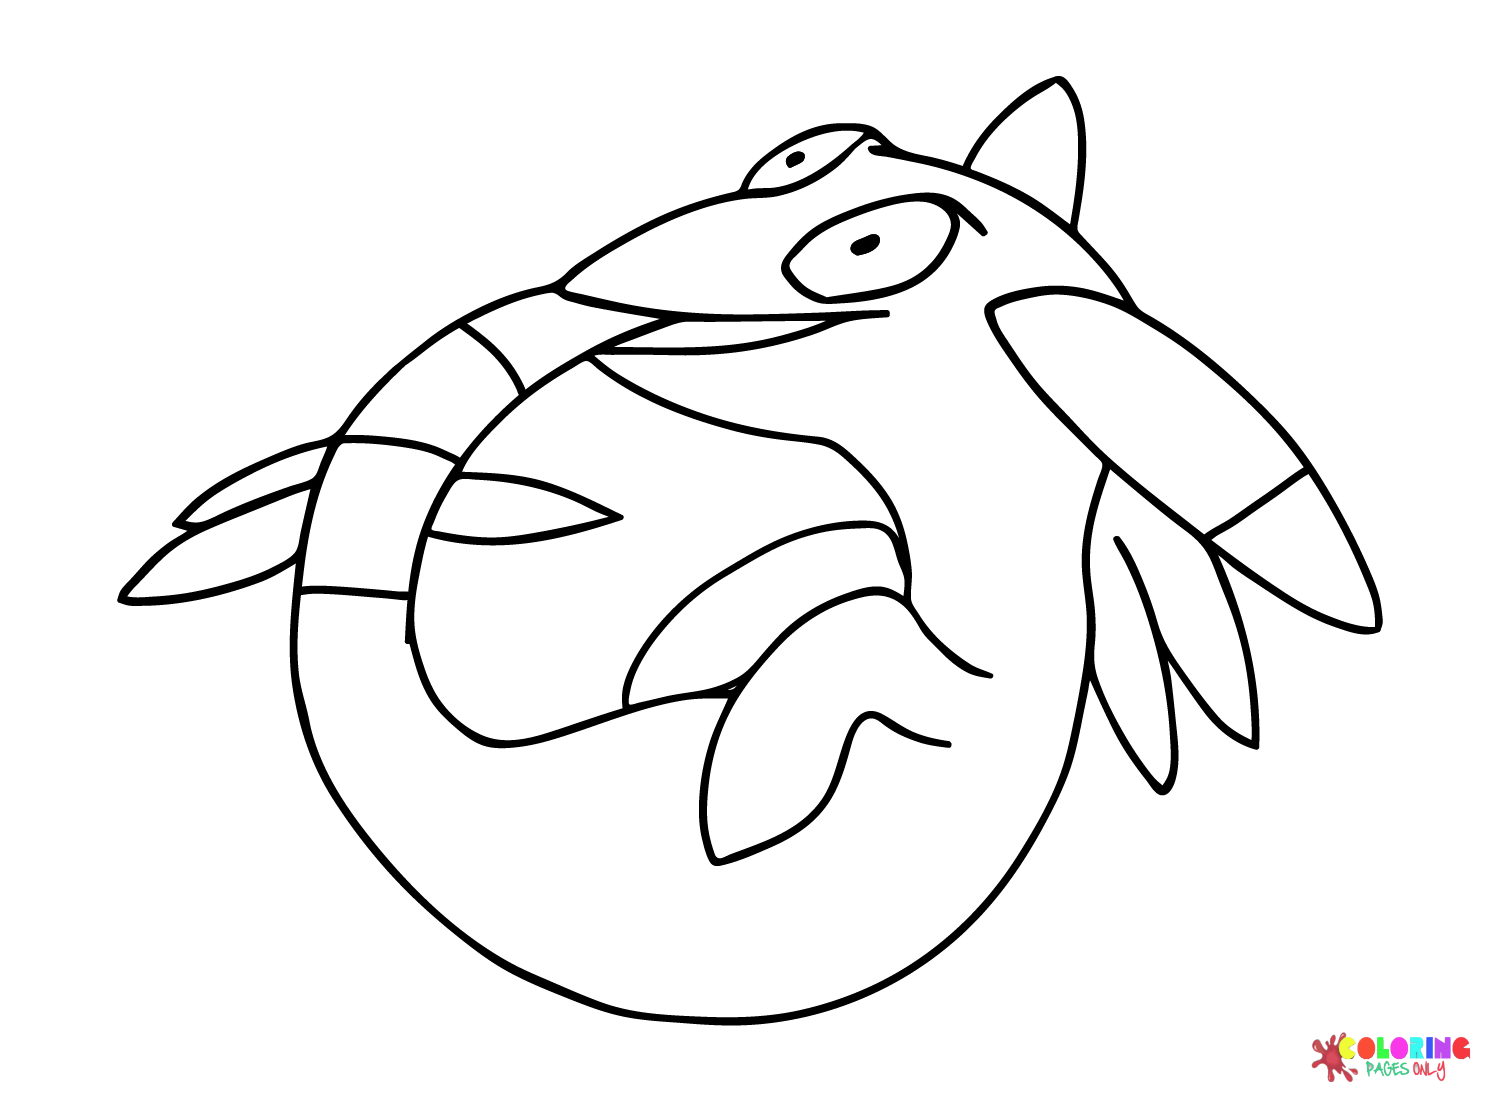 Dreepy Biting Tail Coloring Page